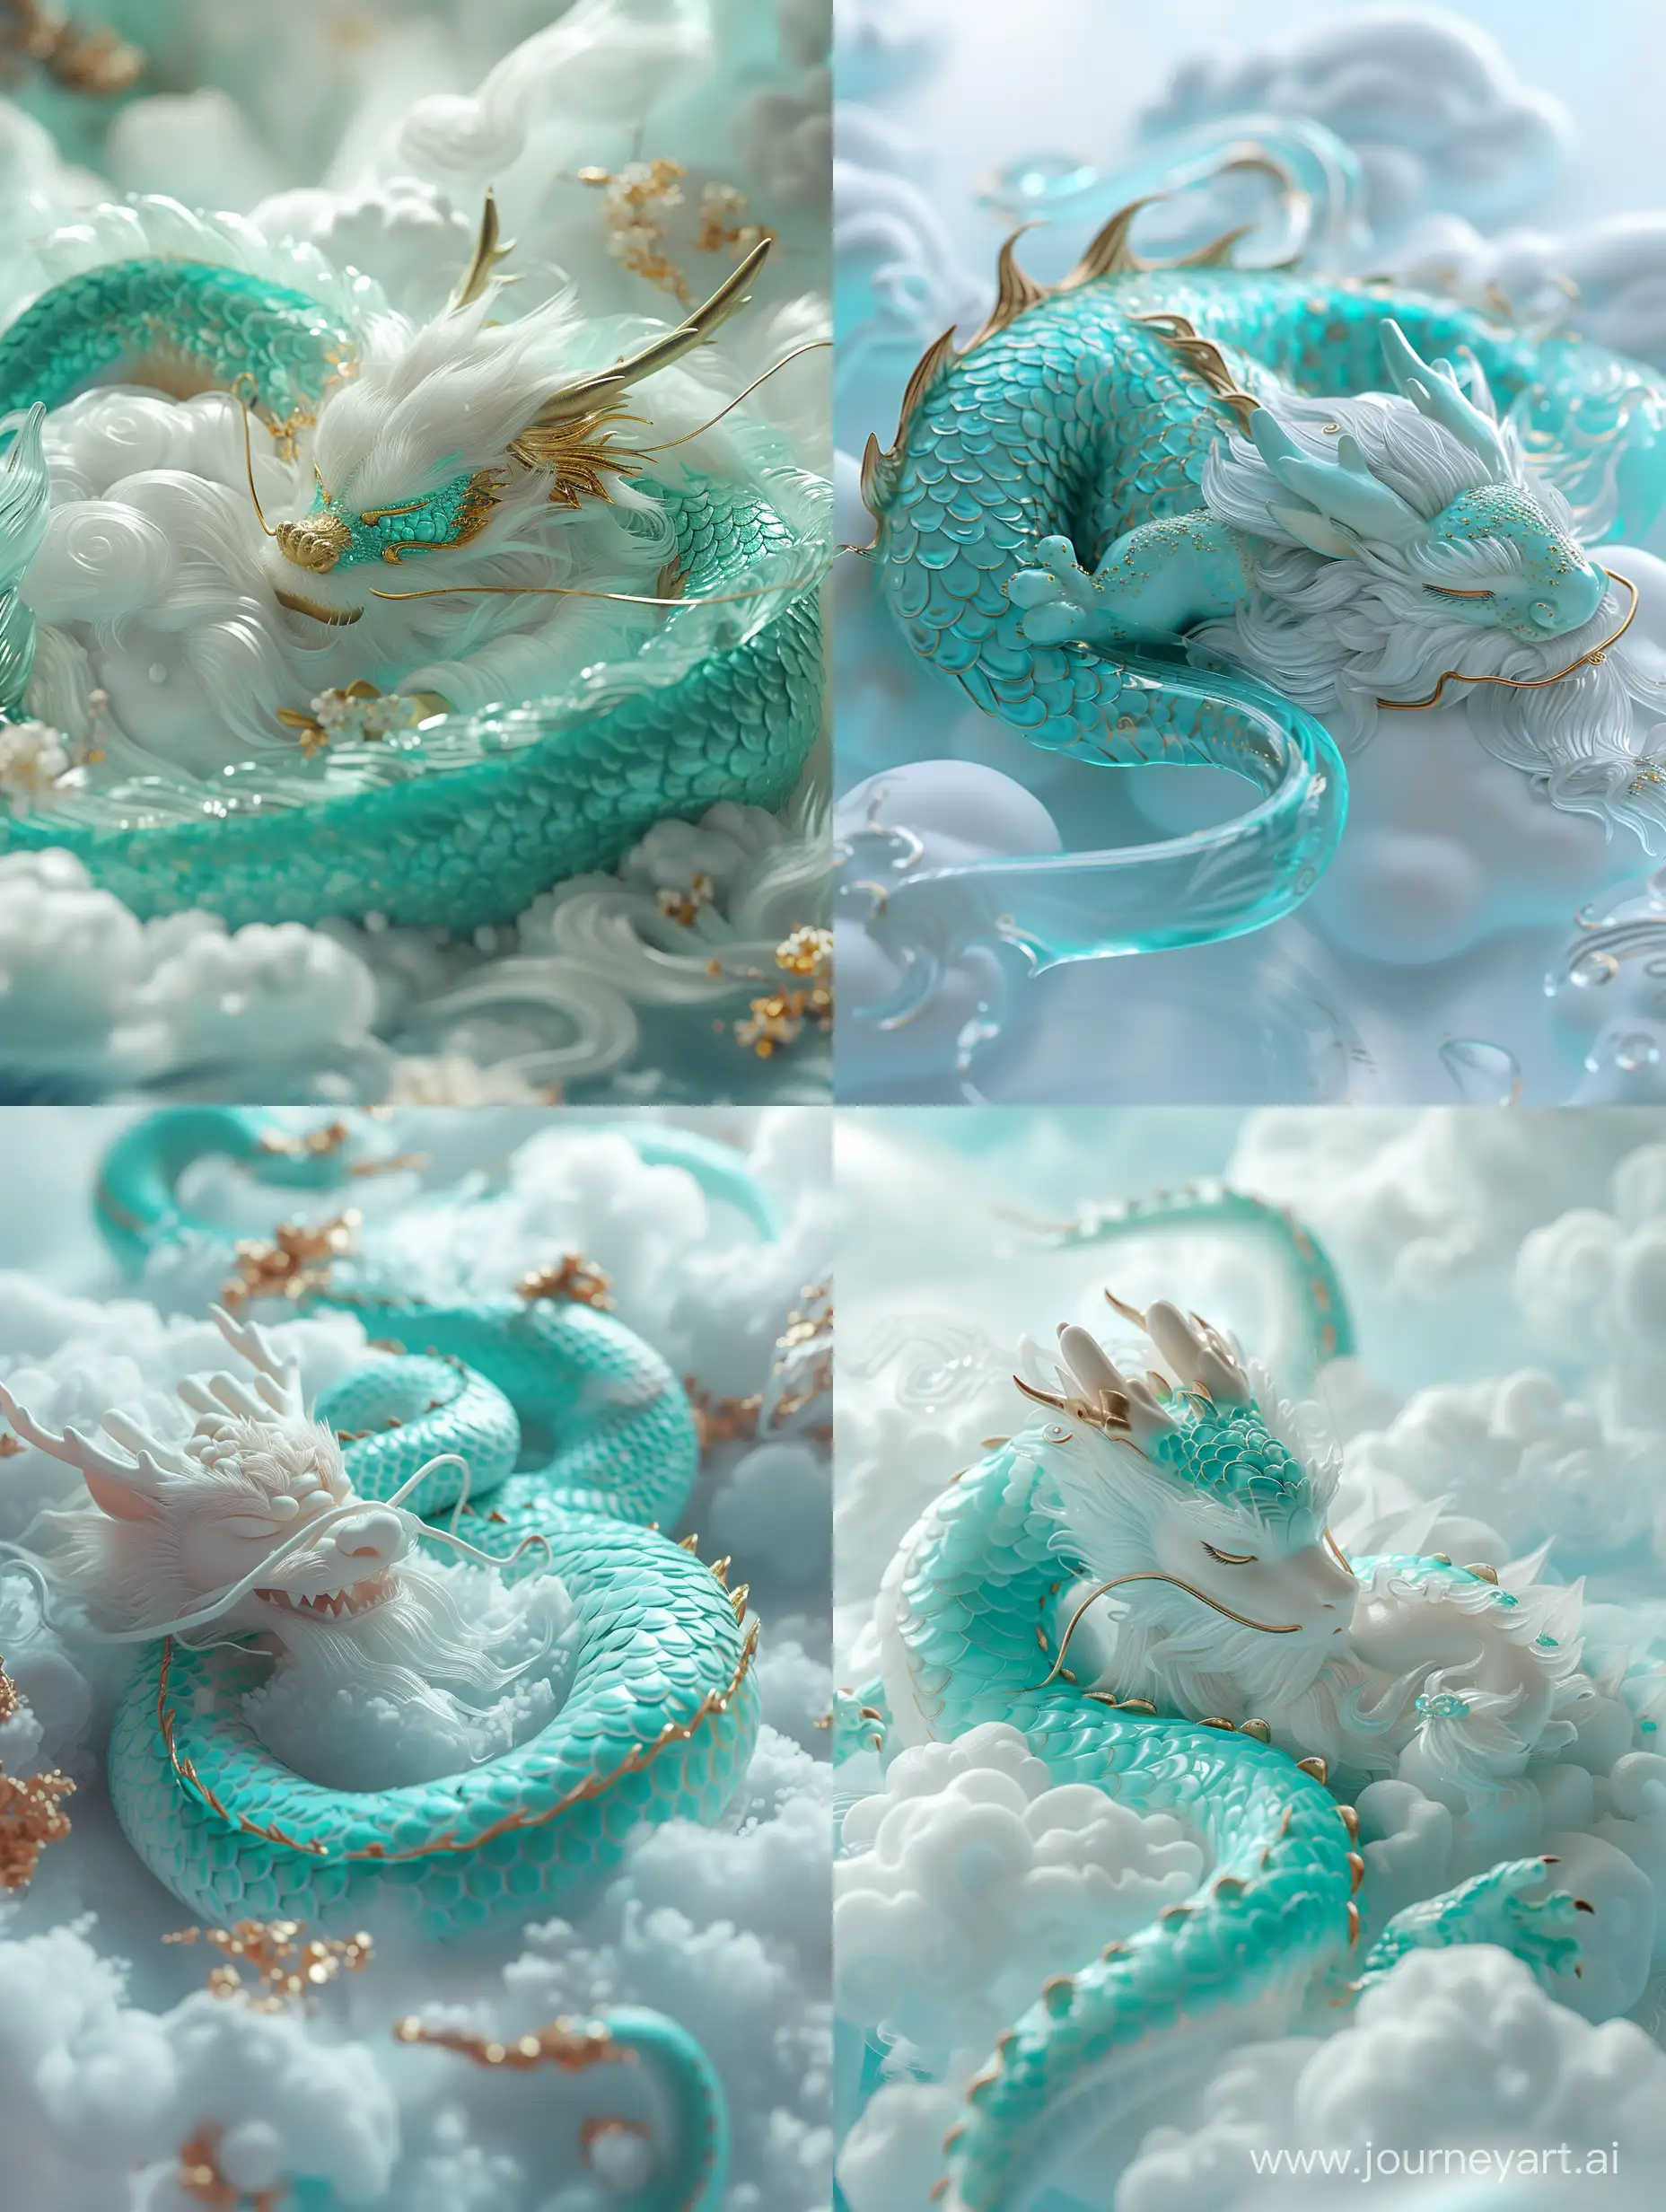 Chinese dragon sleeping on clouds, translucentglass, brush, turquoise and gold style, anime aesthetic, furry art, turquoise and white, delicate,3d, c4d render, 16k, ultra high detail